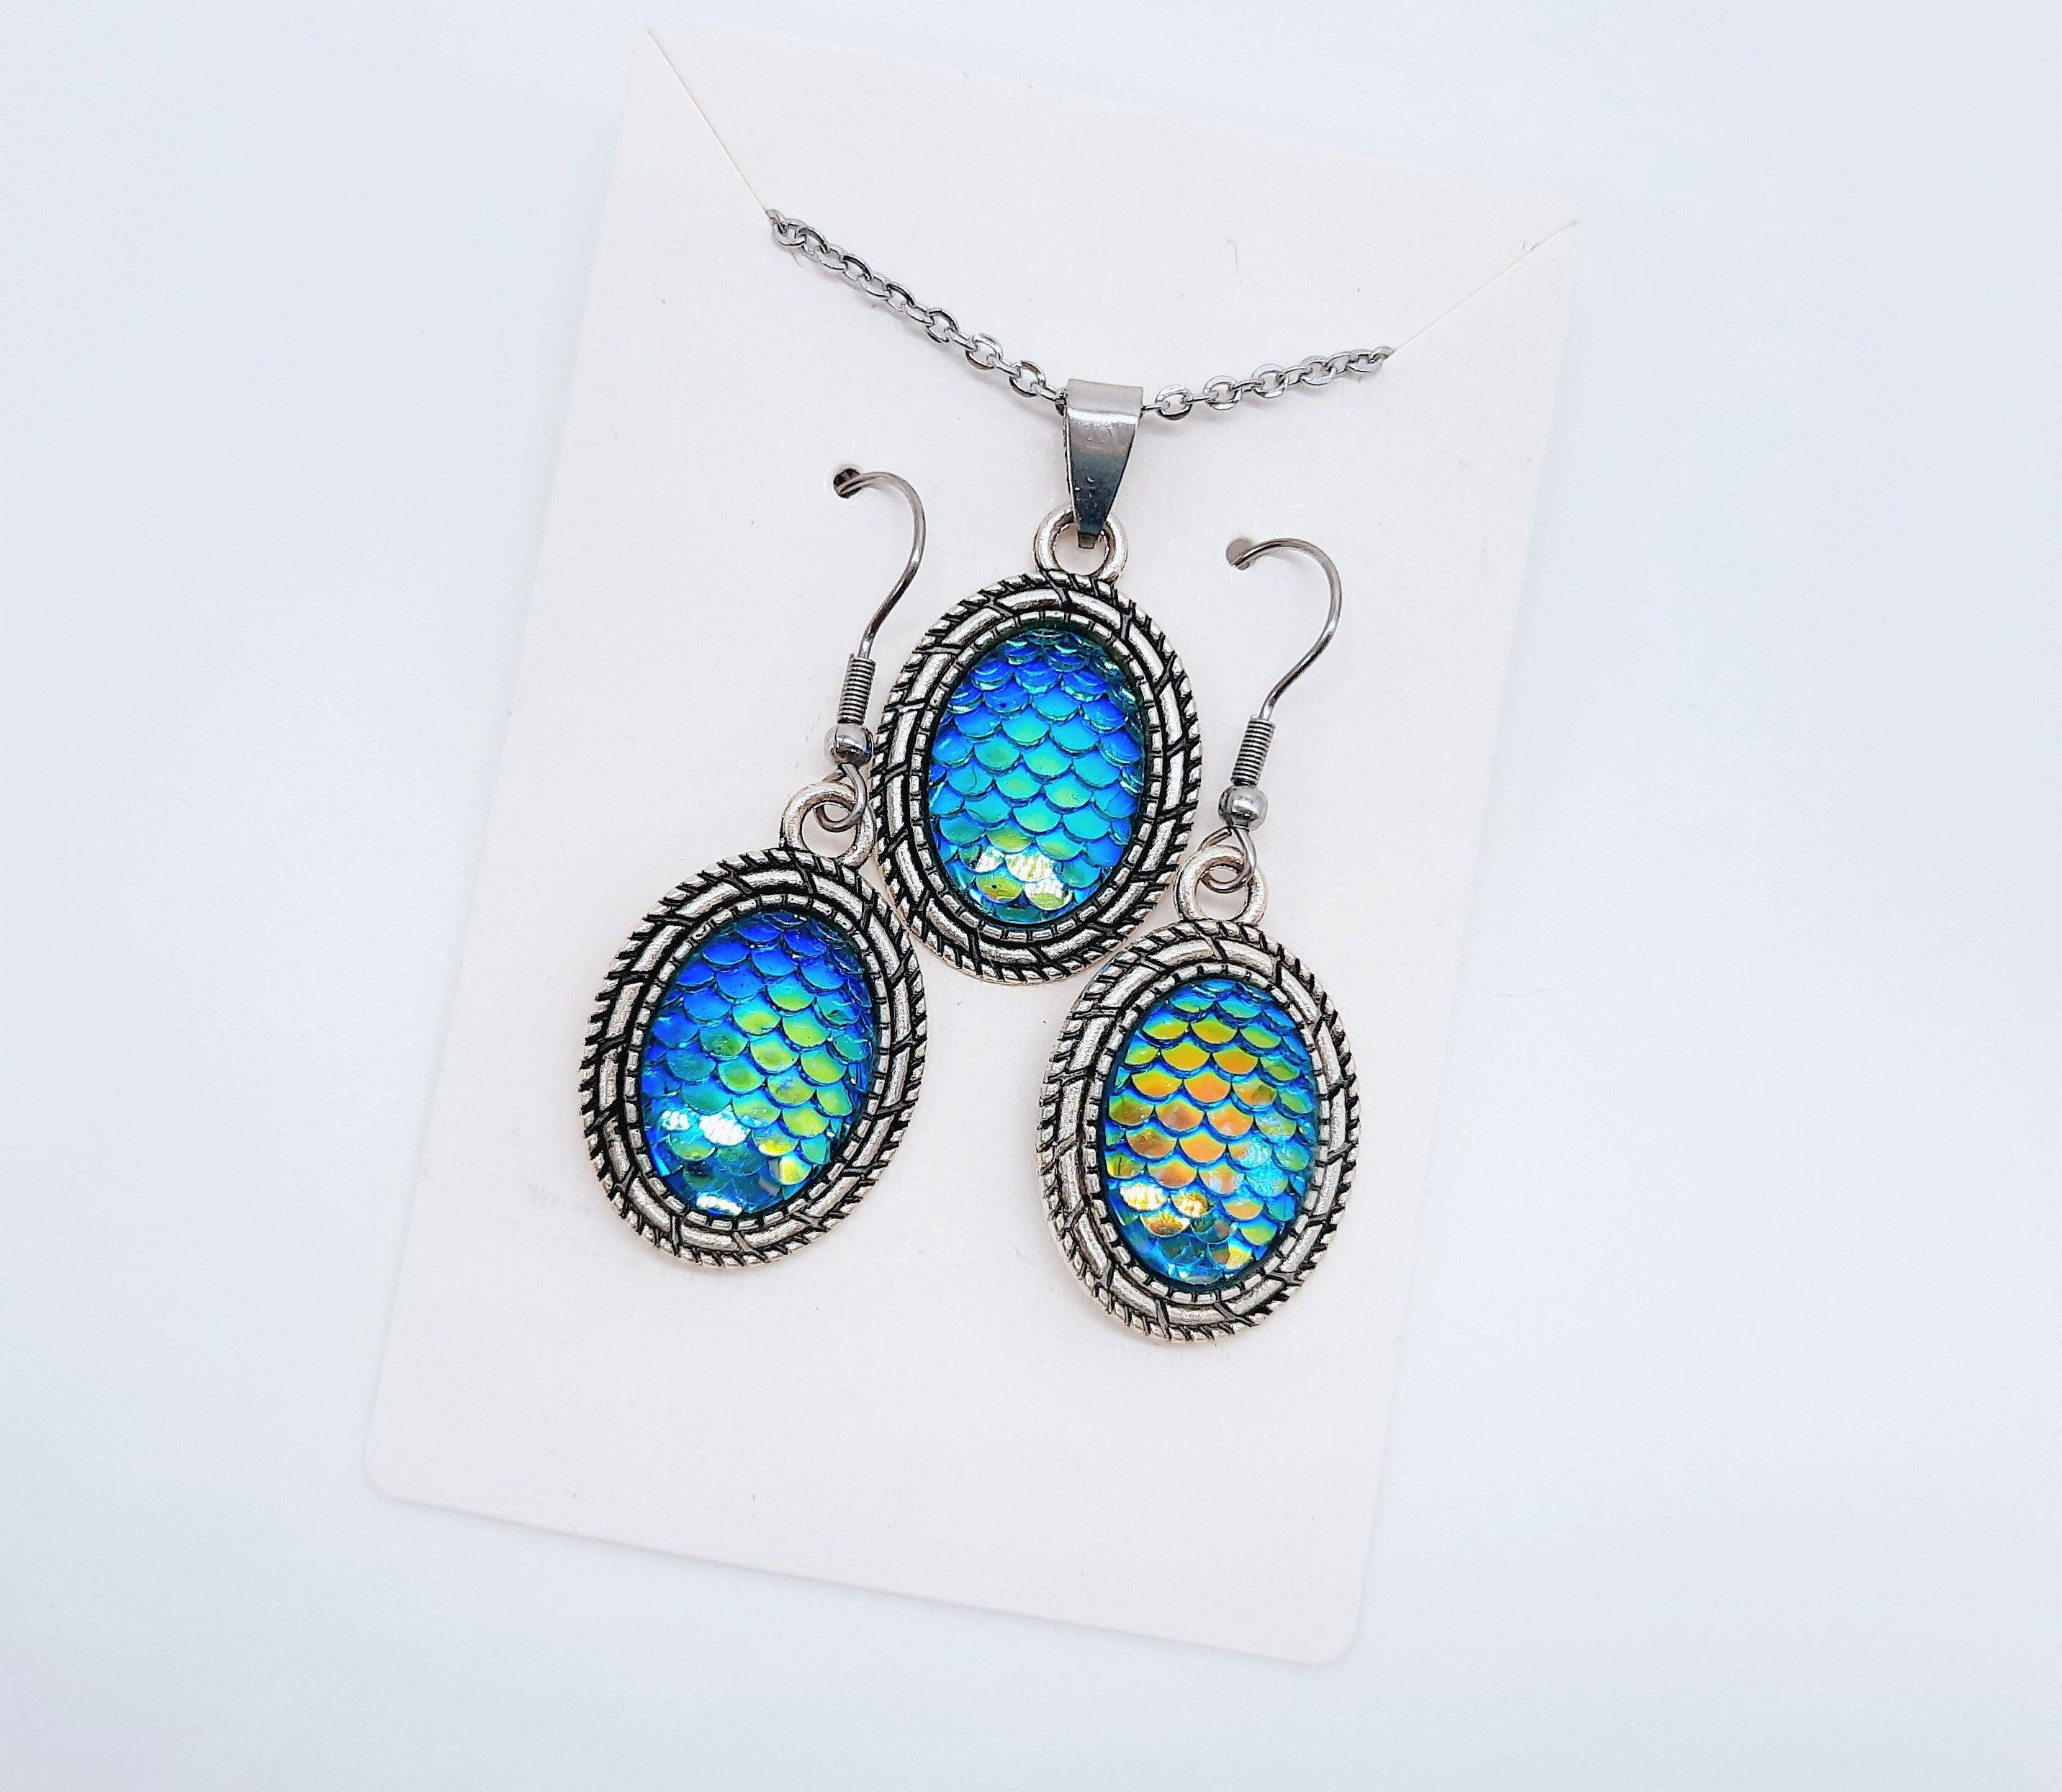 Dragon Scale Necklace Earring Set in Silver or Bronze & 12 Colors Dragon  Egg Mermaid Scale Pendant Charm 18 in Chain - Etsy